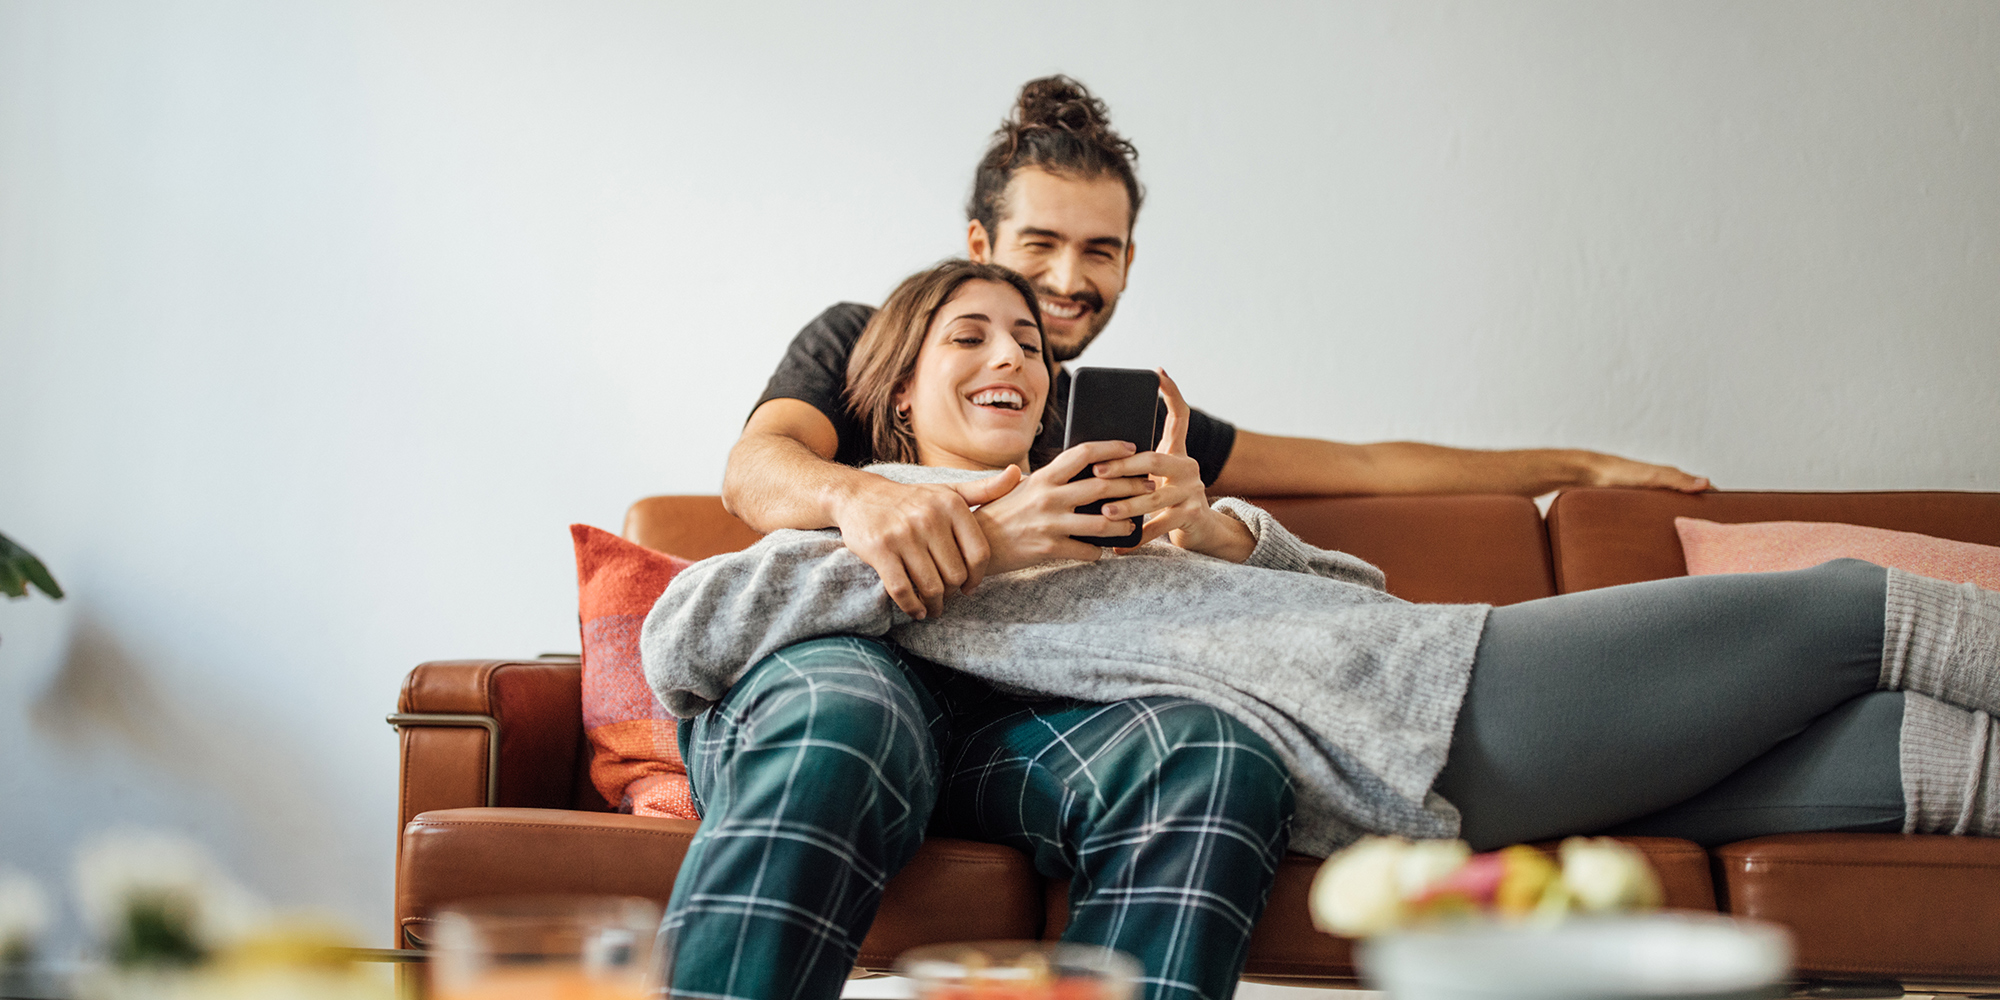 A young couple laying on a sofa smiling at the smartphone one of them is holding.